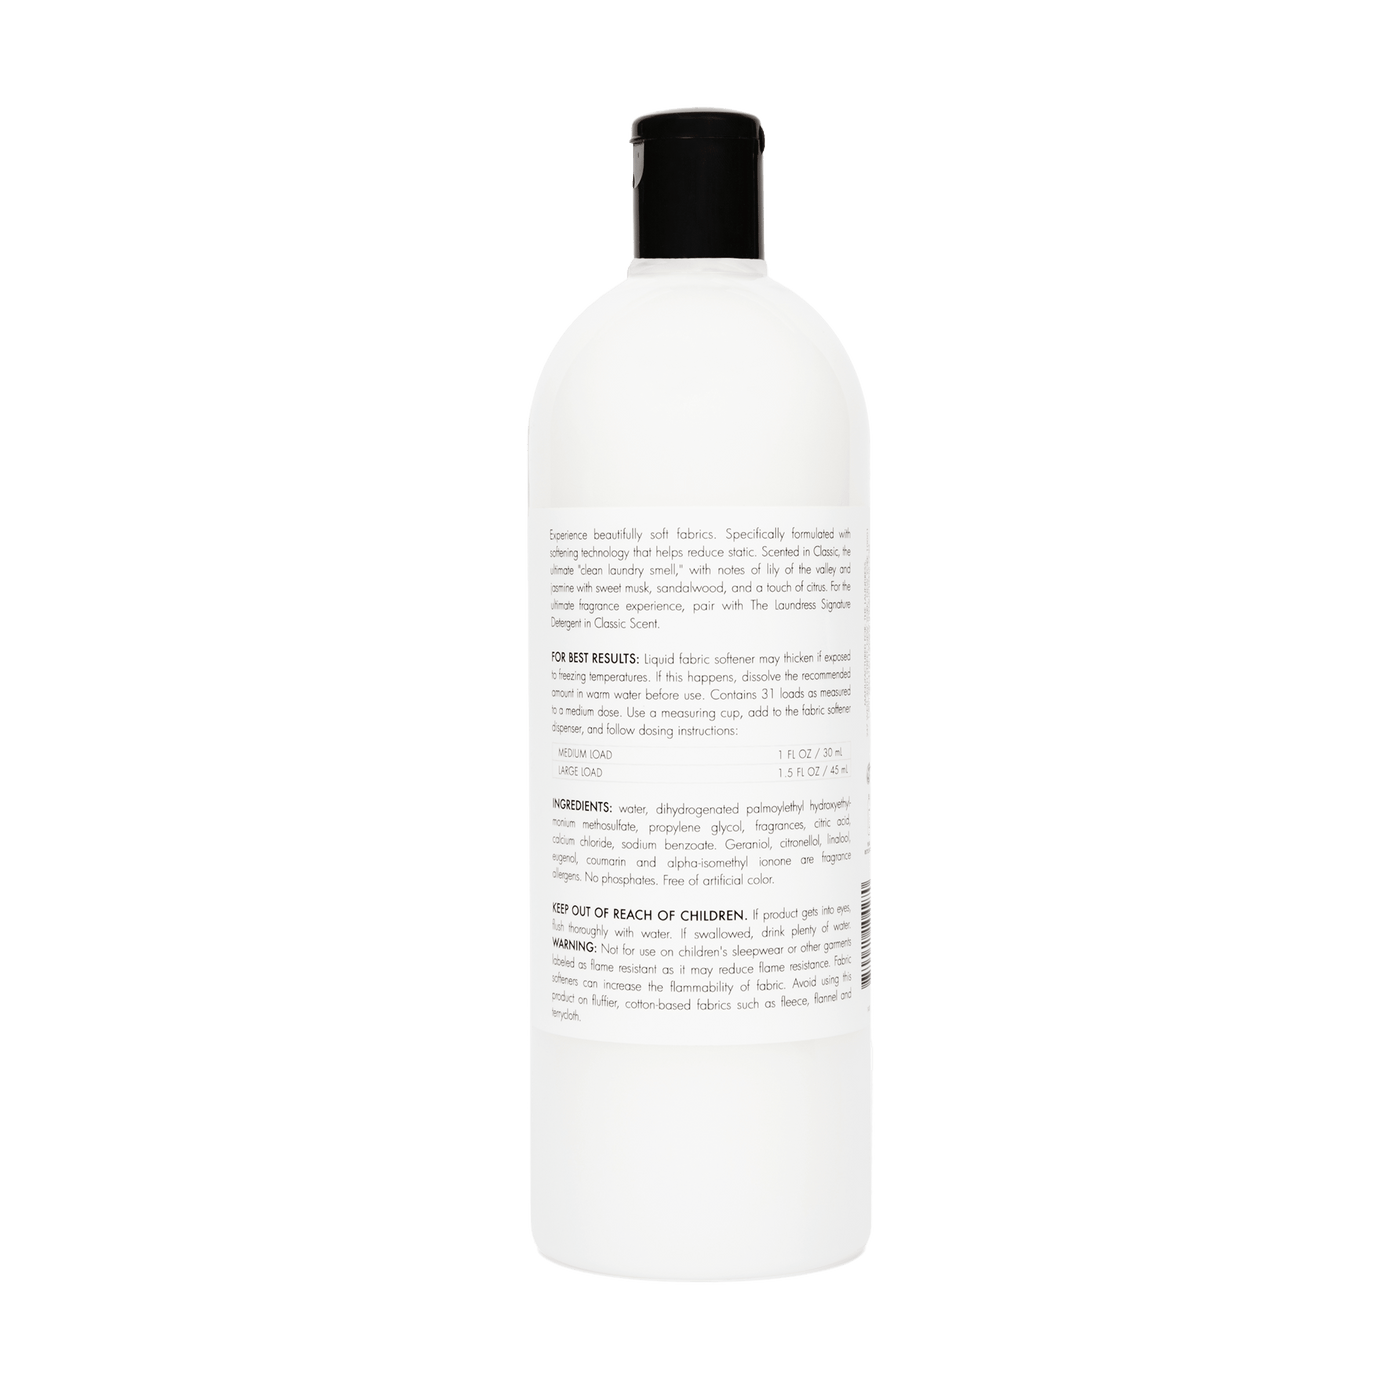 Fabric Conditioner Classic Household Supplies The Laundress